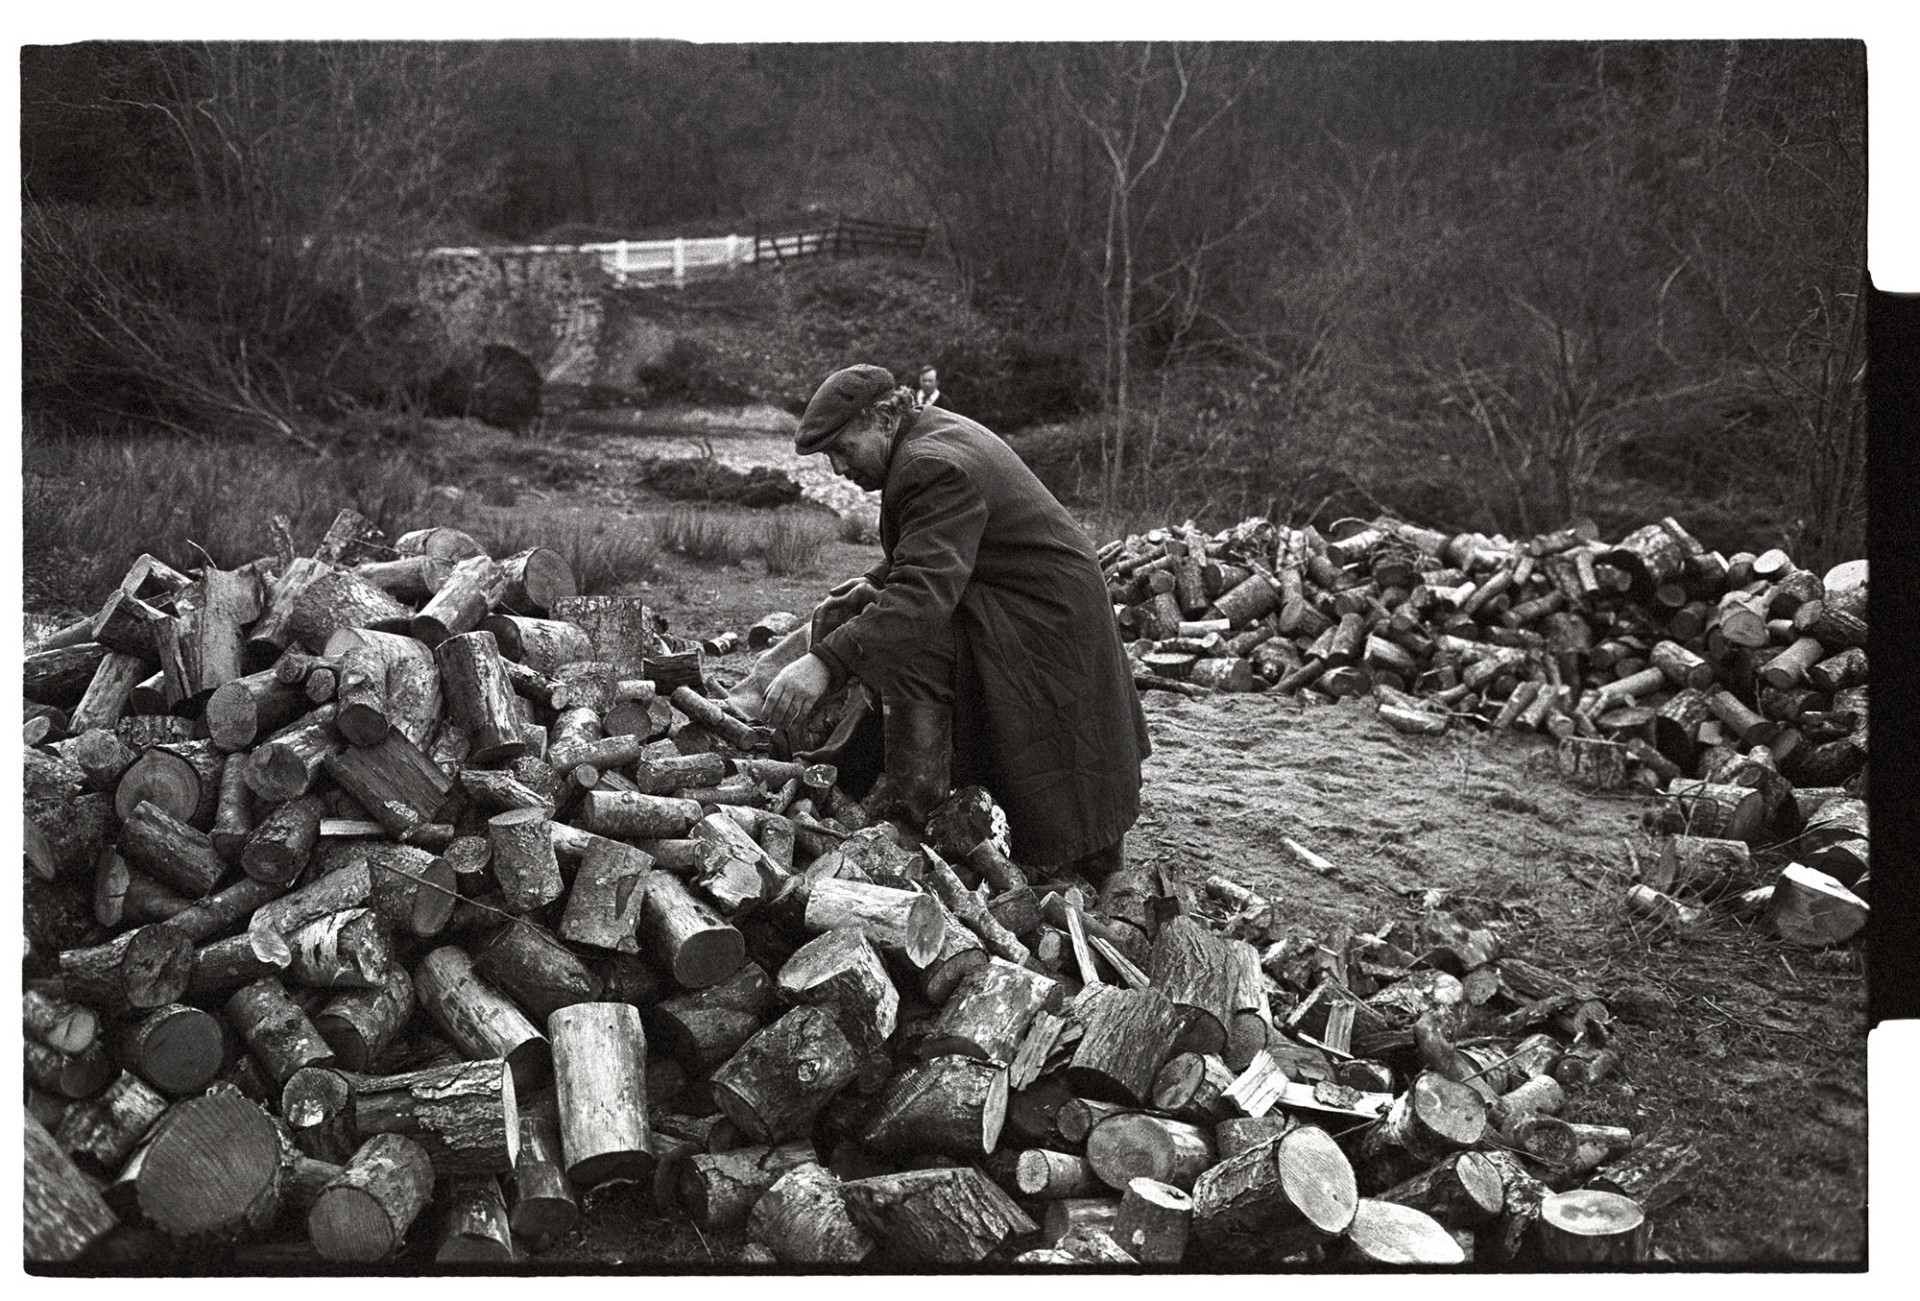 Men carrying logs from pile.
[Ivor Brock collecting logs from a pile at Millhams, Dolton.]